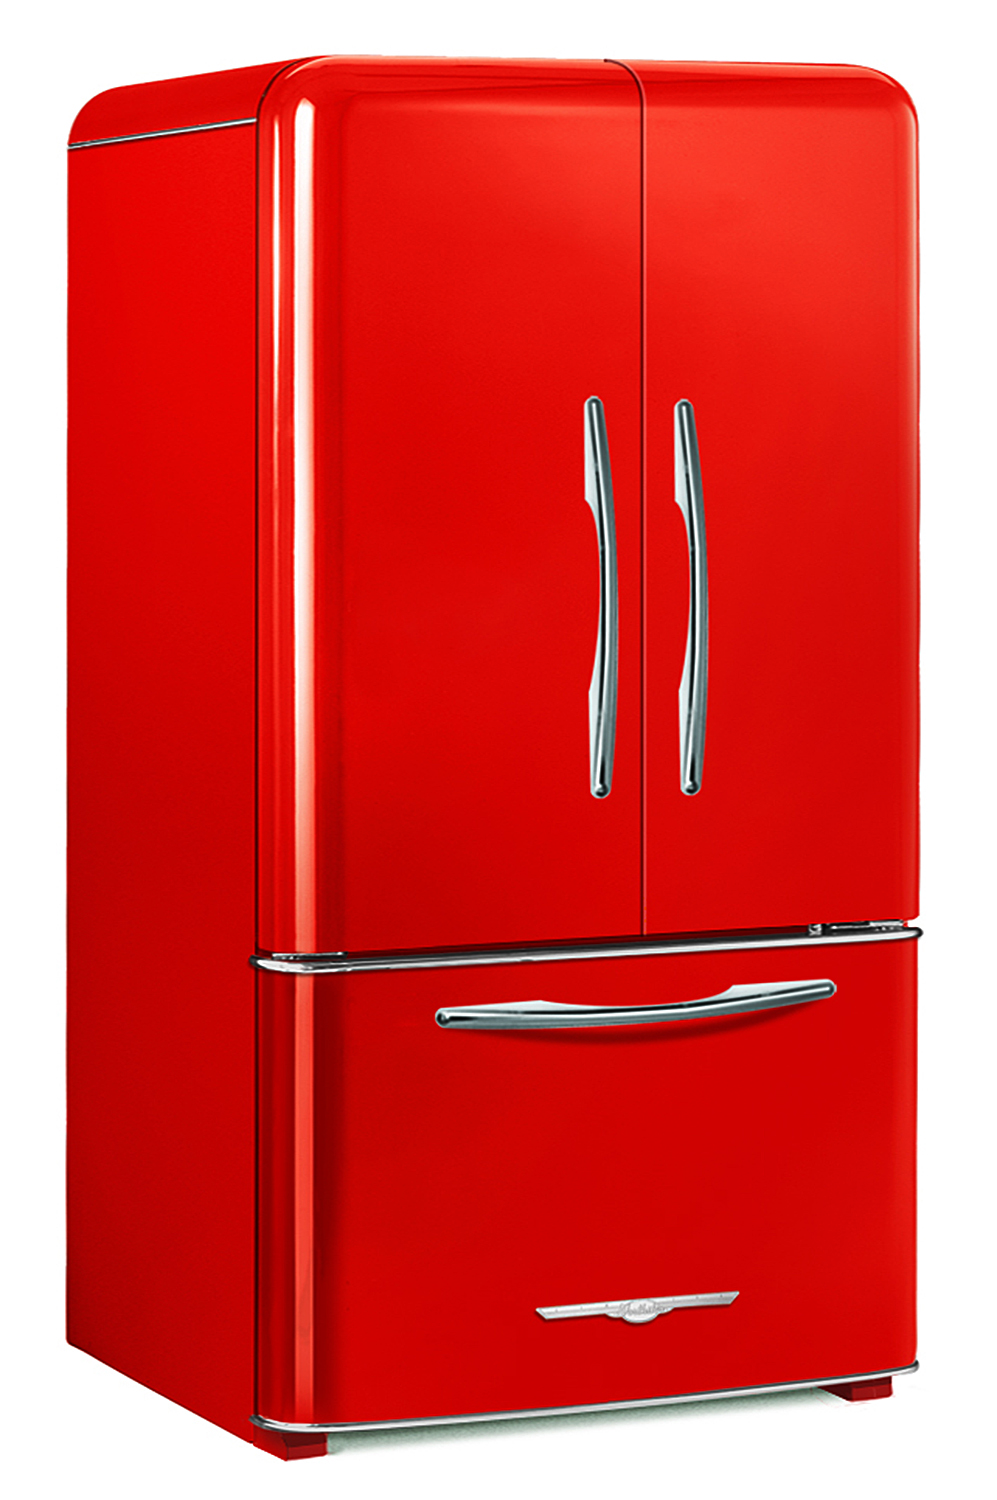 Are old-style refrigerators popular in design?